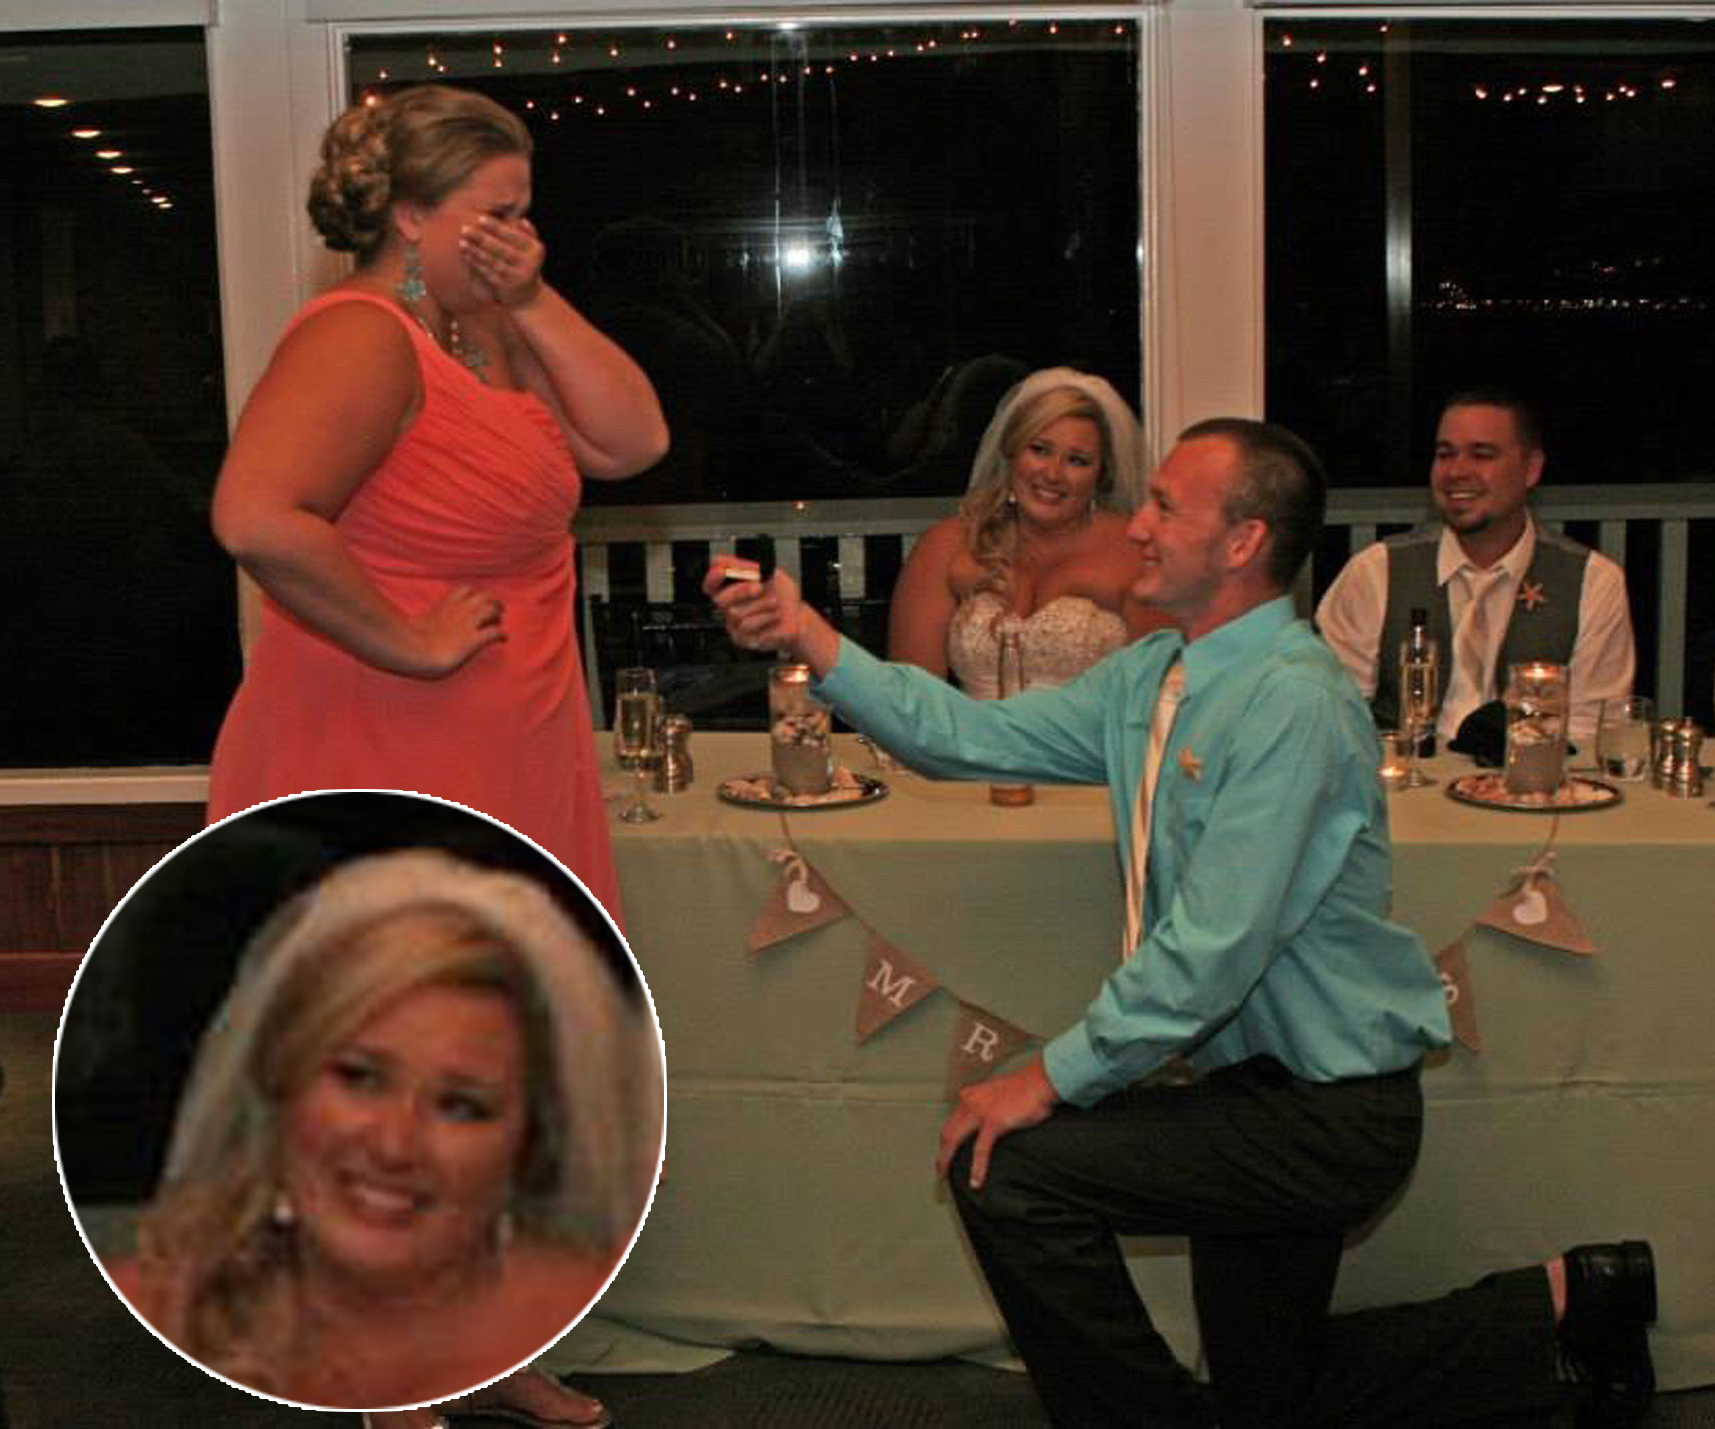 Man proposes to girlfriend at another woman’s wedding